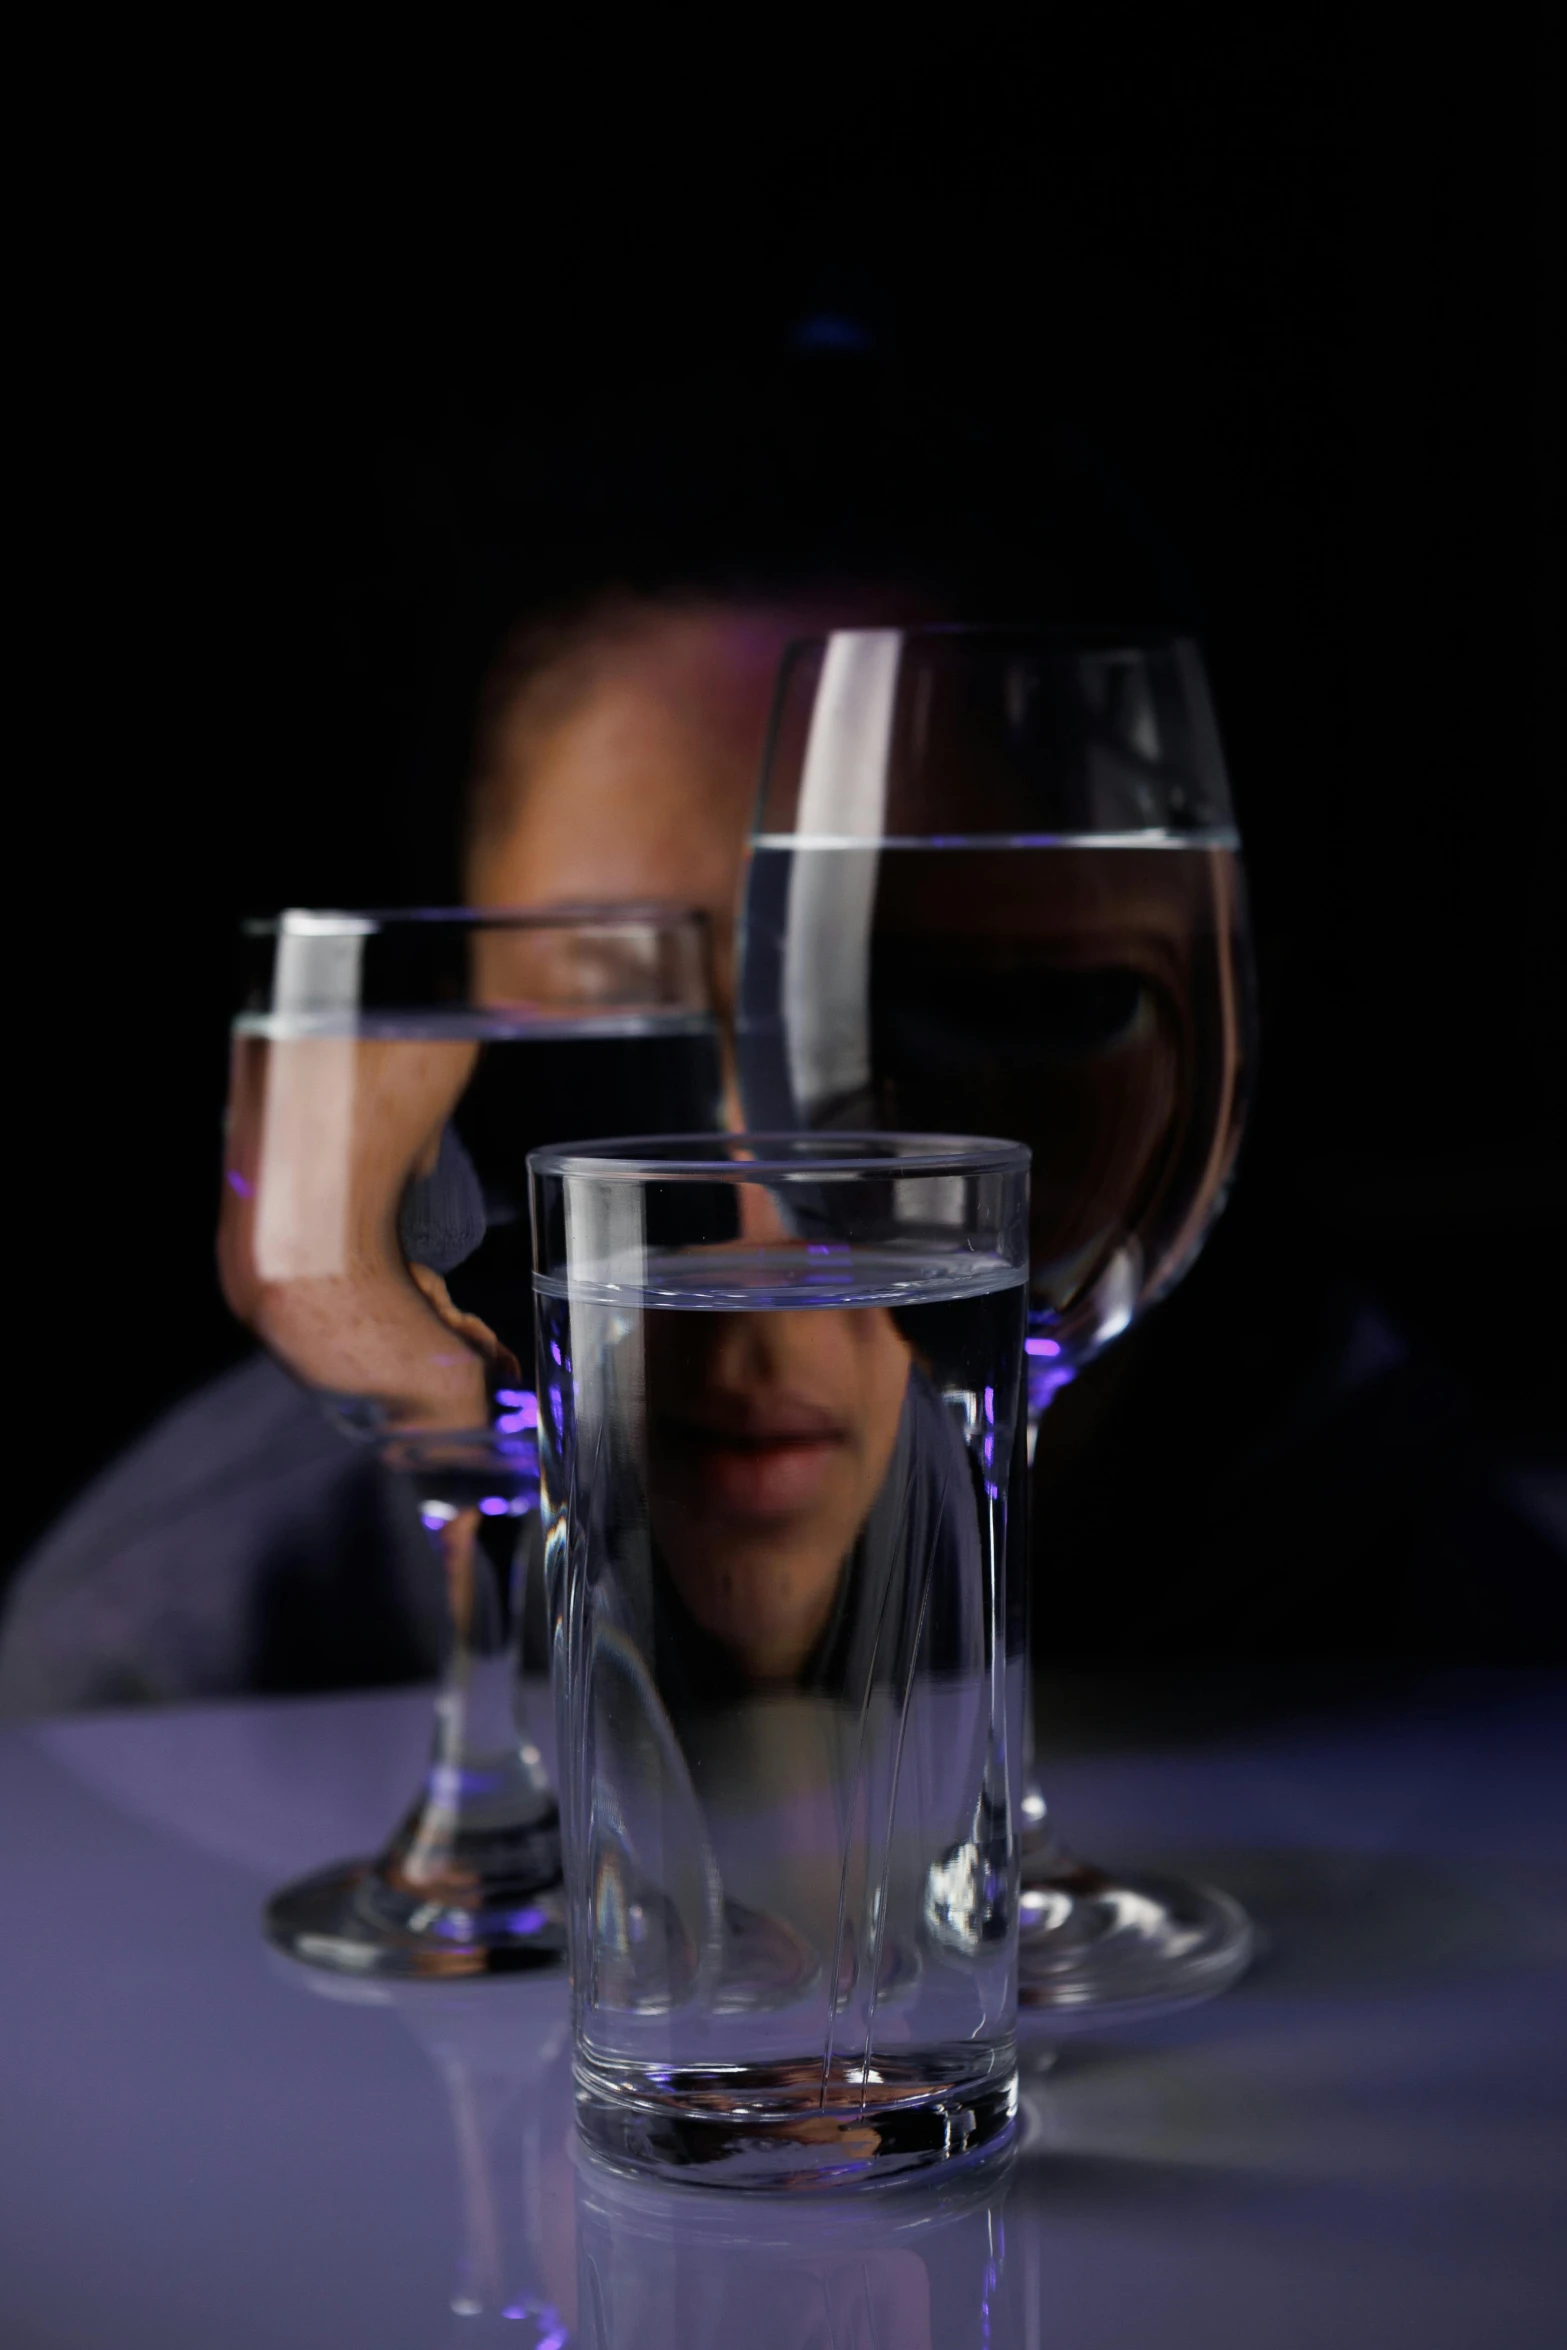 there are two glasses on the table with a person